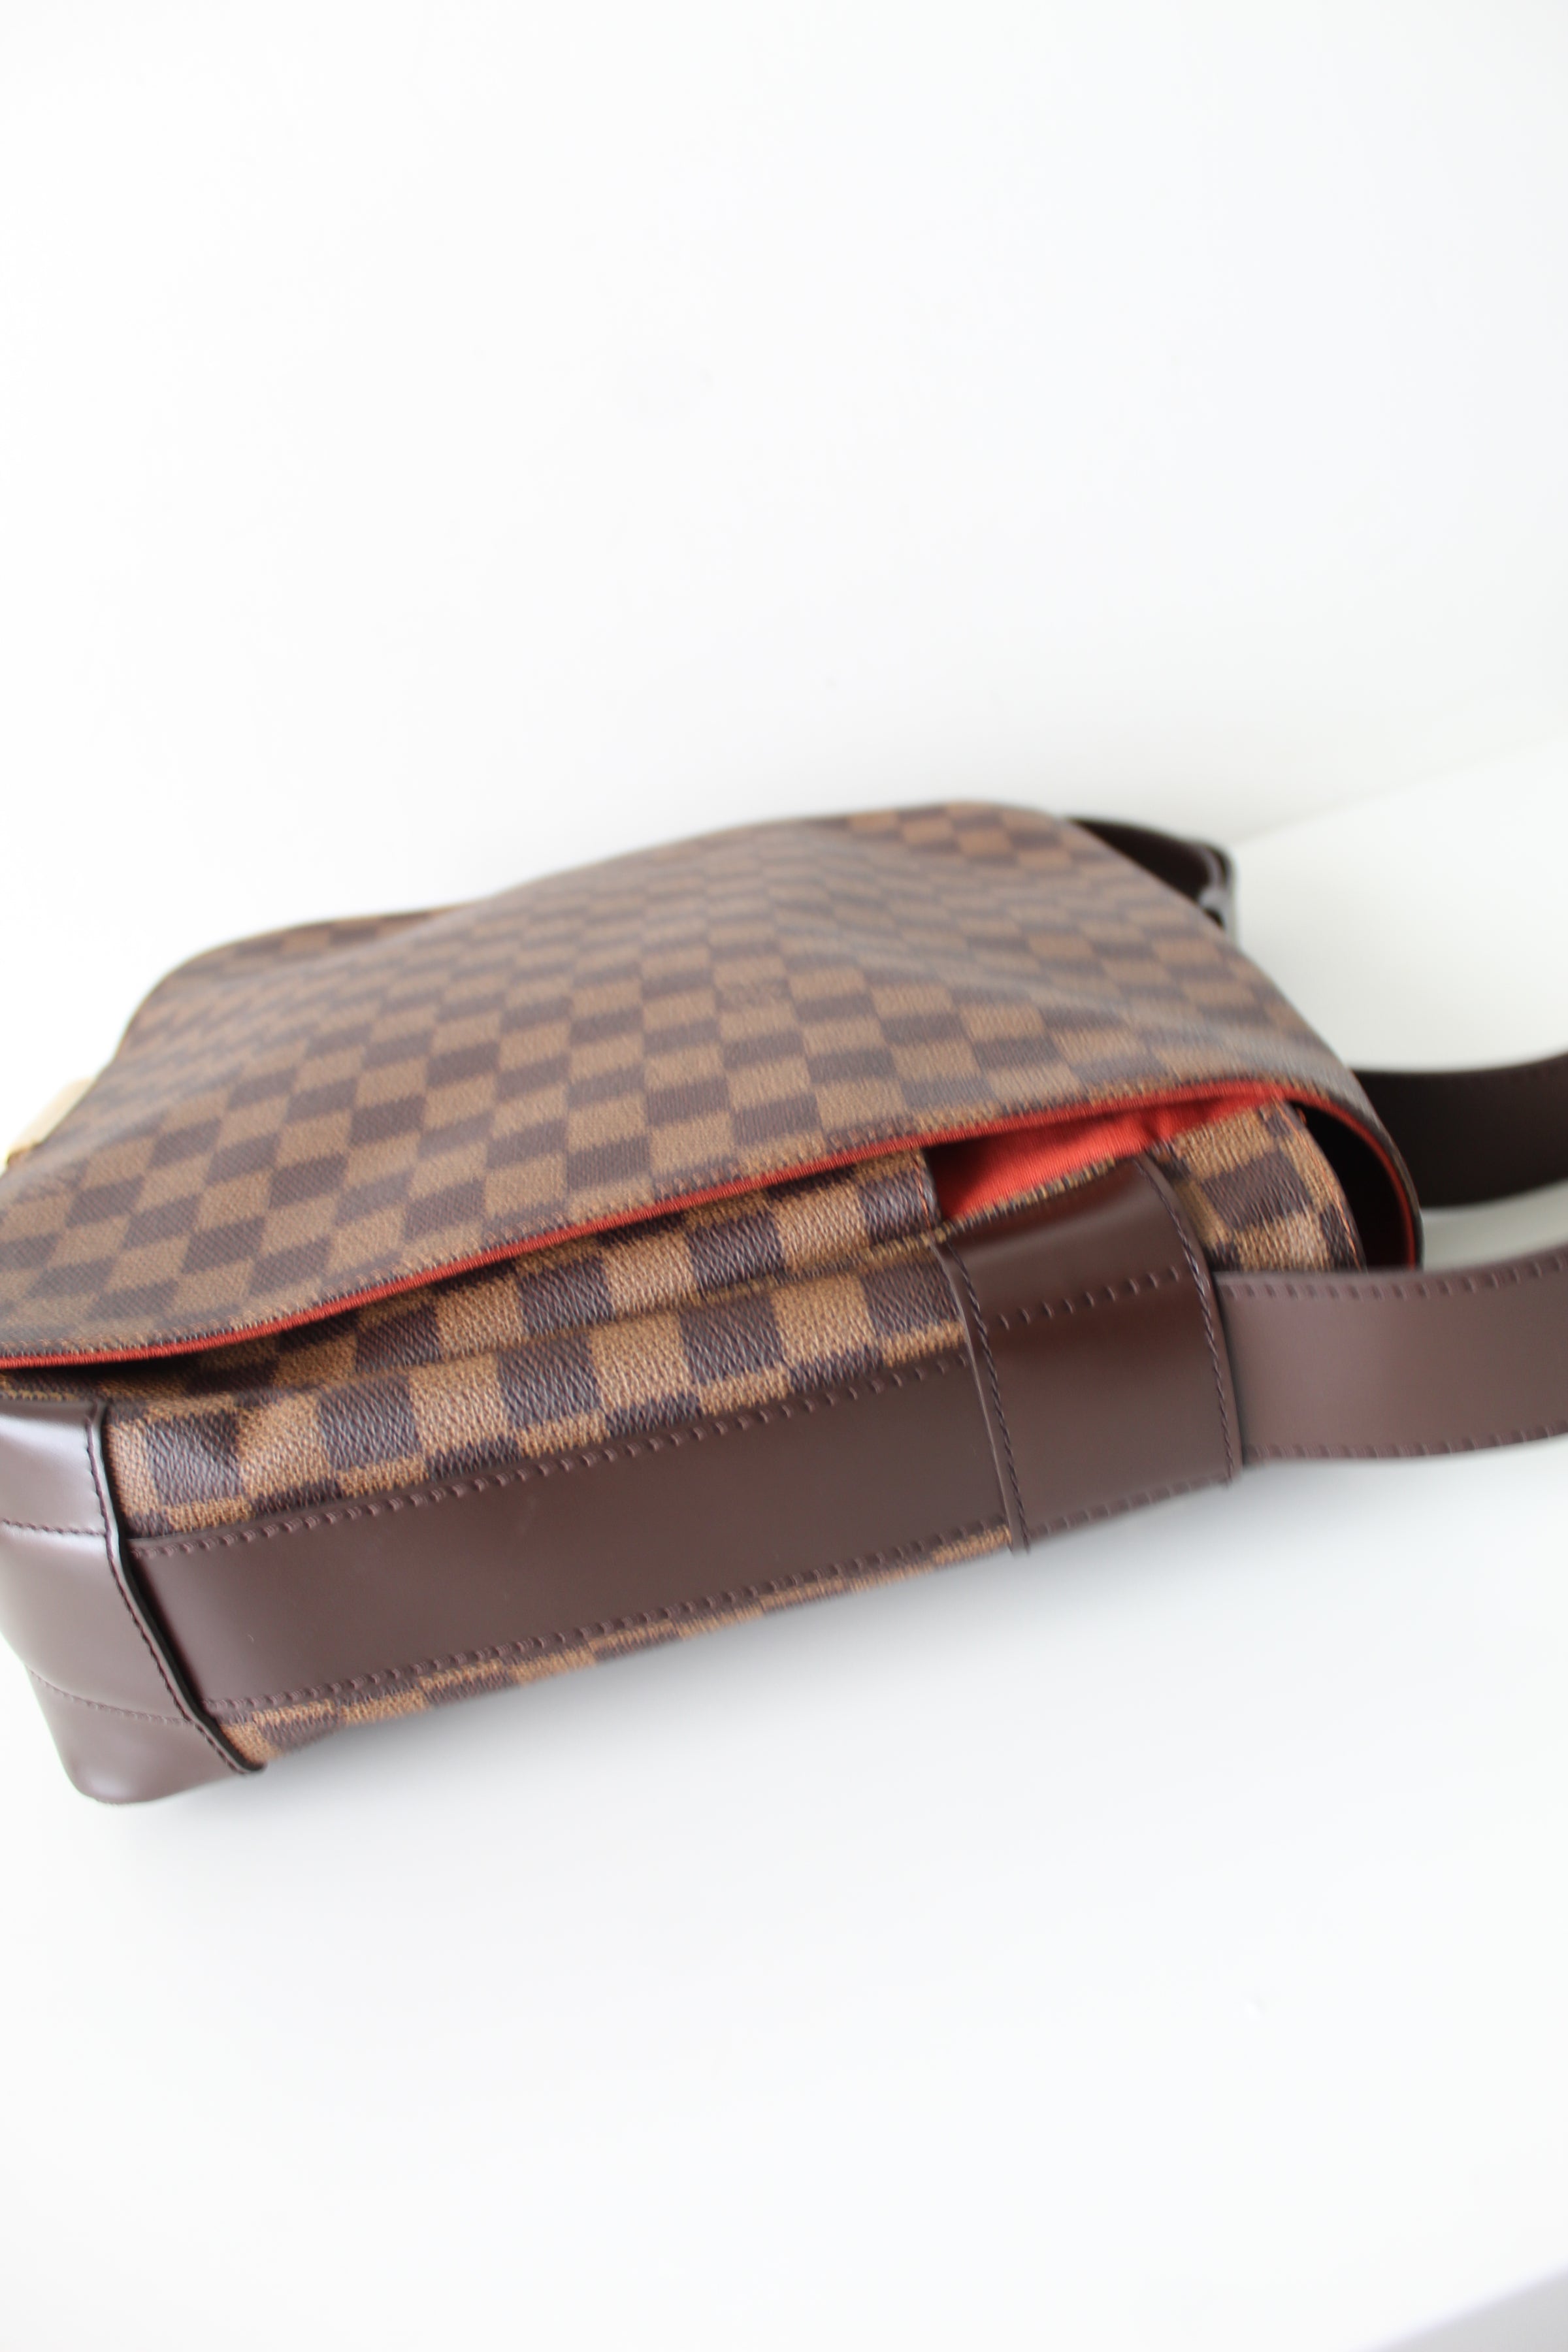 Recycled Chic Boutique - Louis Vuitton Abbesses Messenger Bag, ON